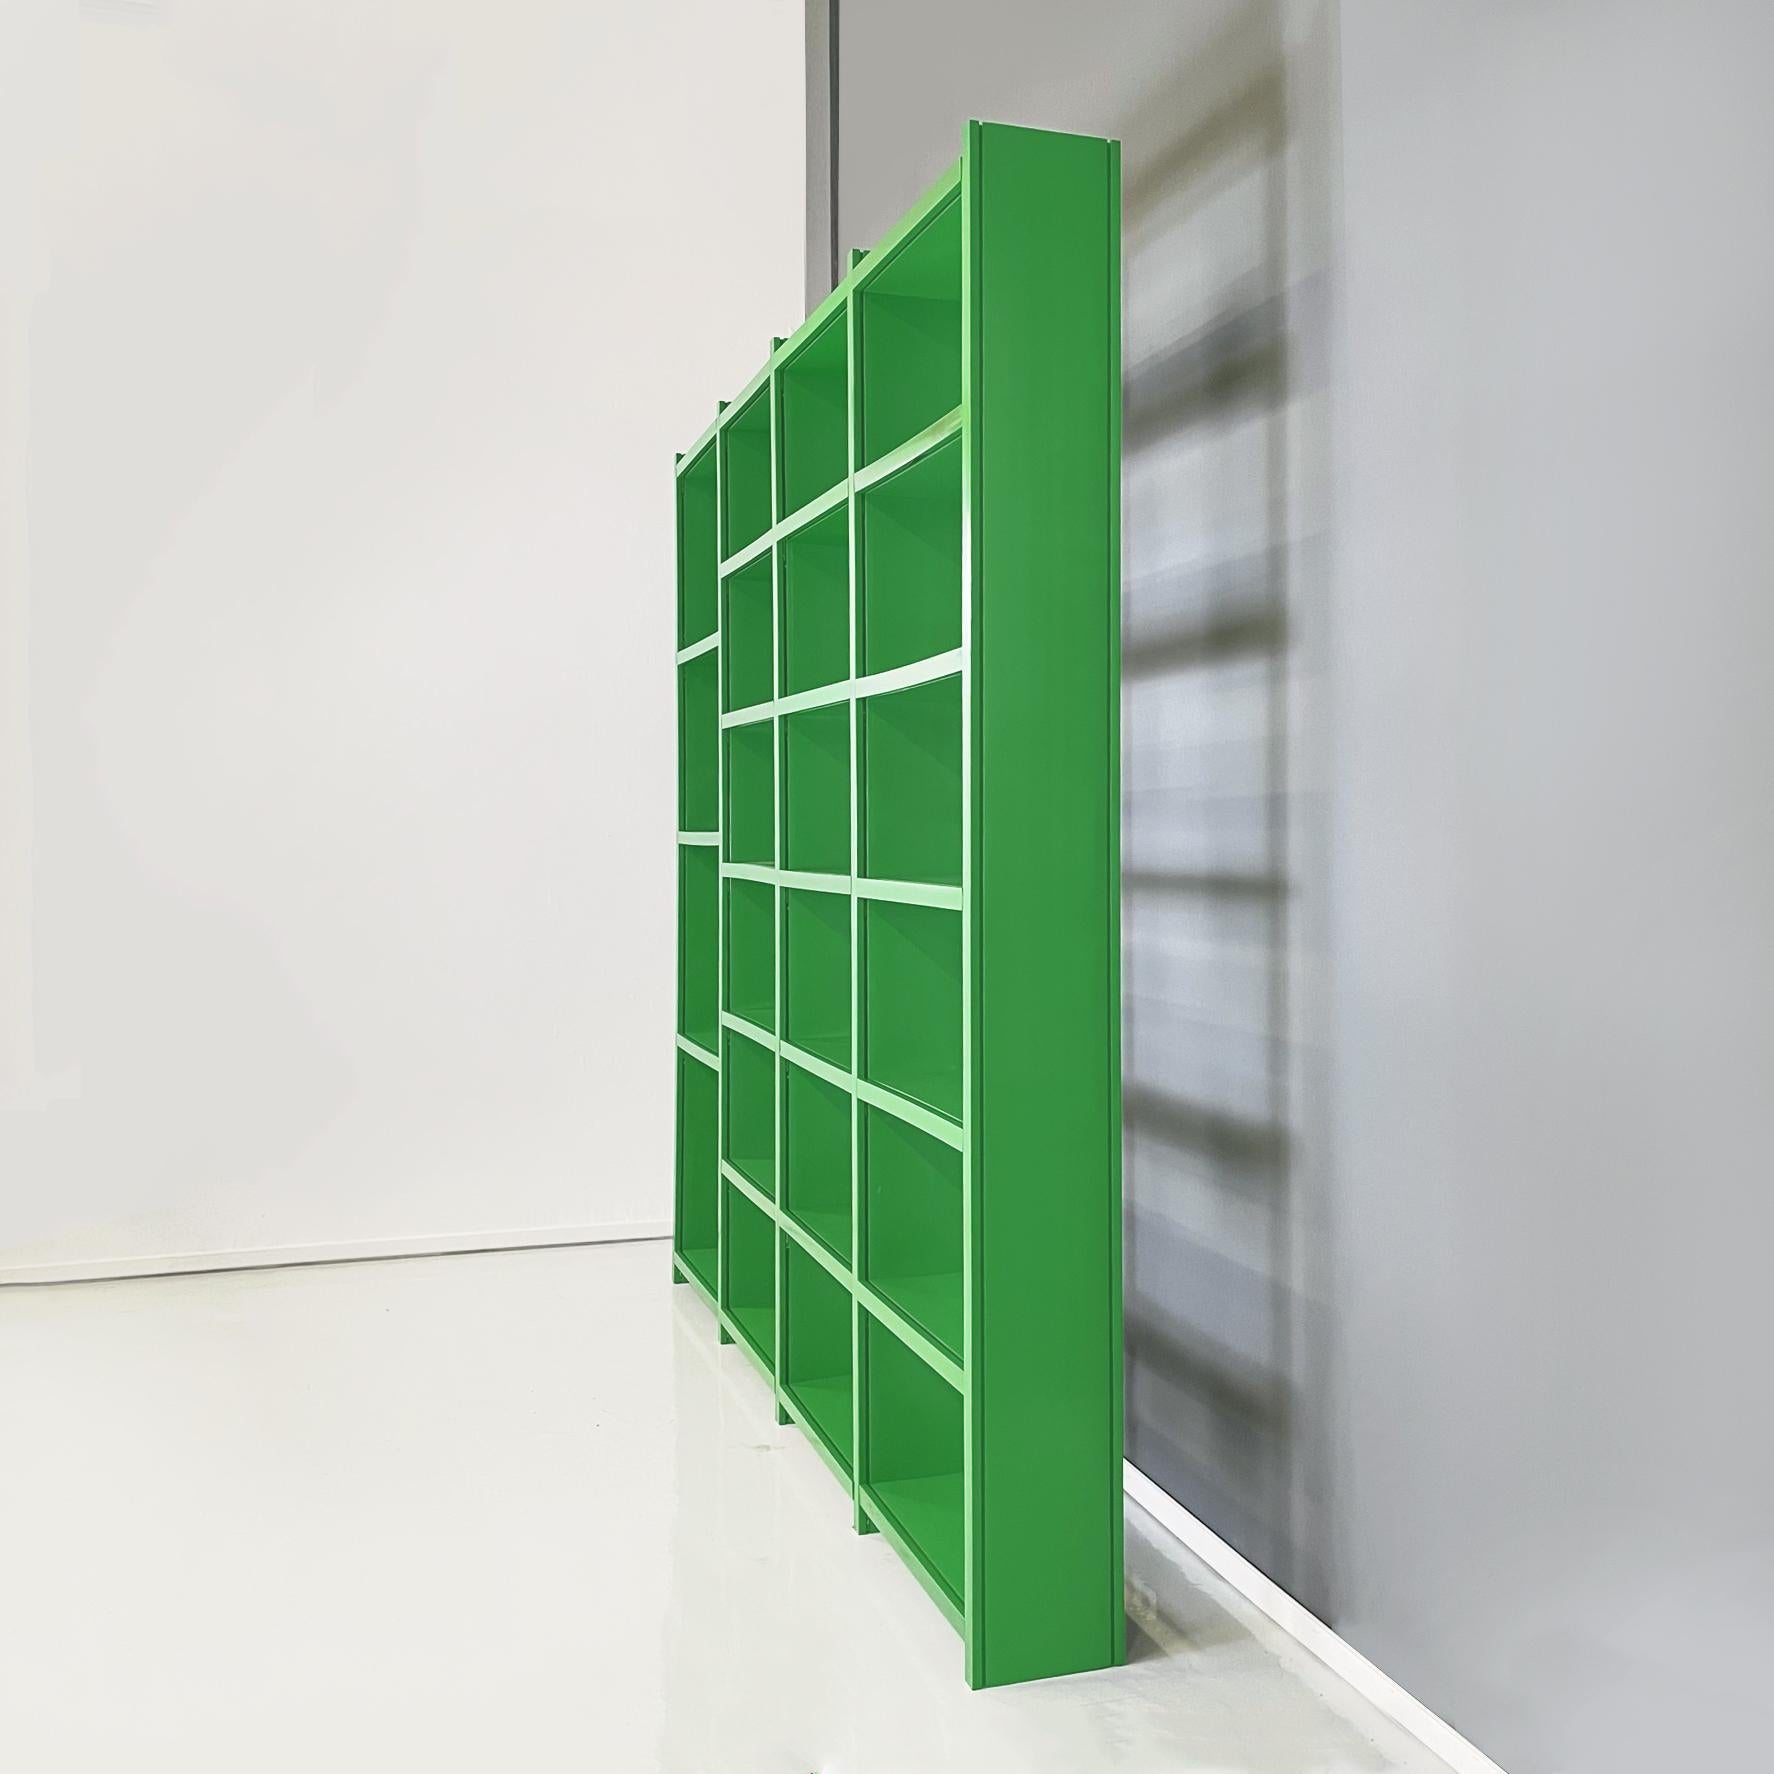 Italian modern Green plastic modular Bookcase mod. Dodona by Ernesto Gismondi for Artemide, 1970s
Modular sky-earth bookcase mod. Dodona in bright green plastic. This bookcase has several shelves with grooves, in which white metal bookends can be